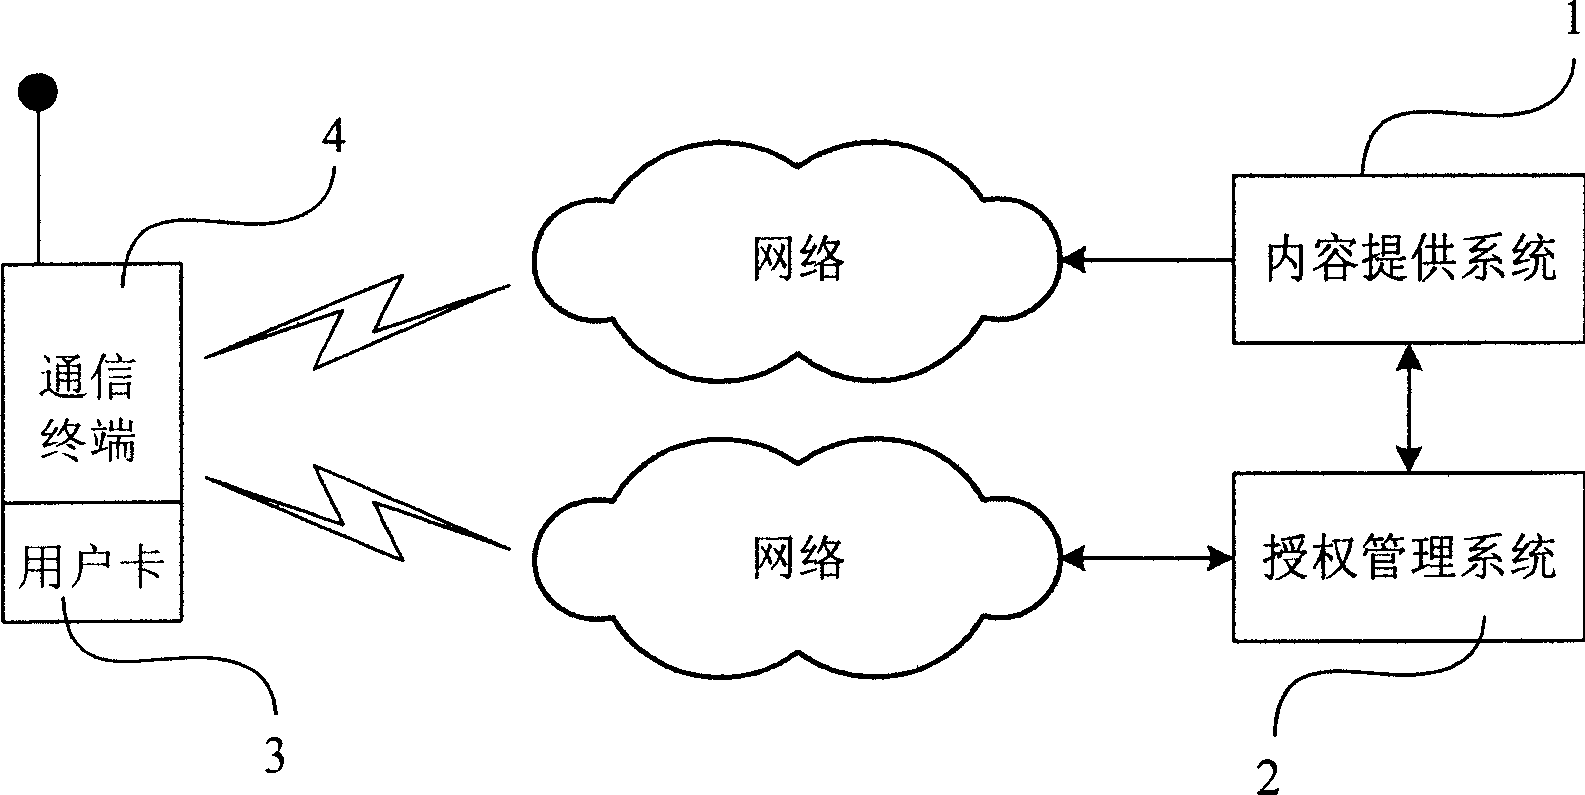 Method for receiving and deleting media data key